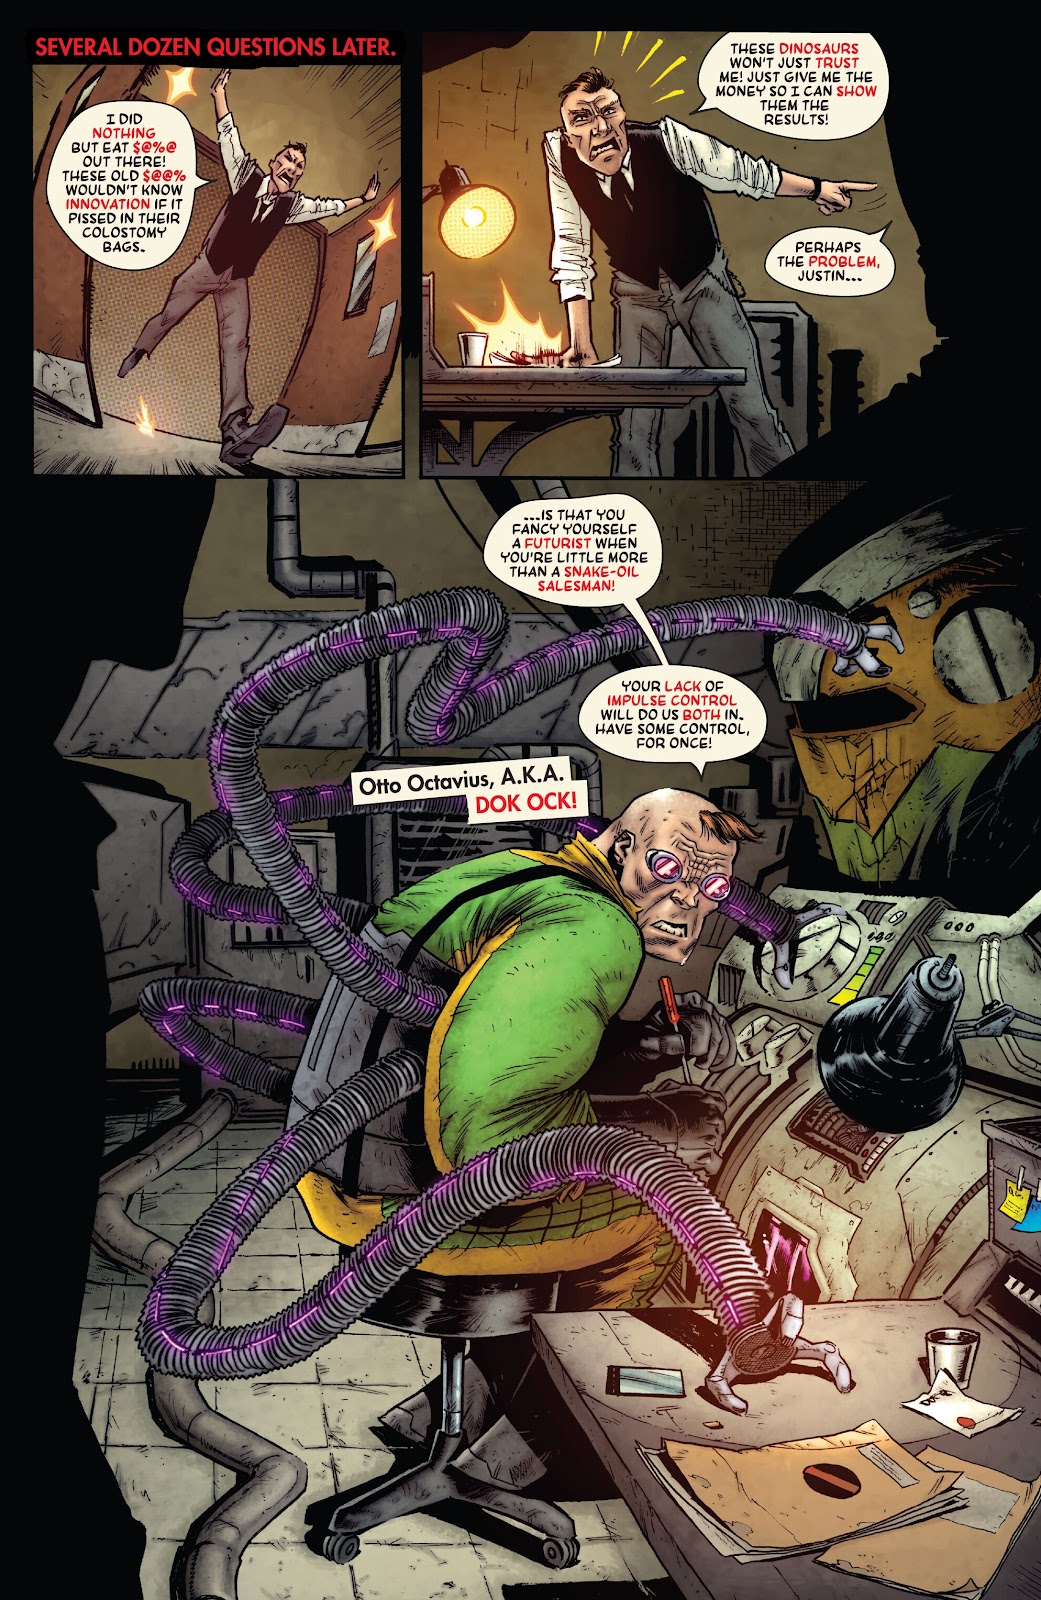 Spider-Punk: Arms Race issue 1 - Page 11